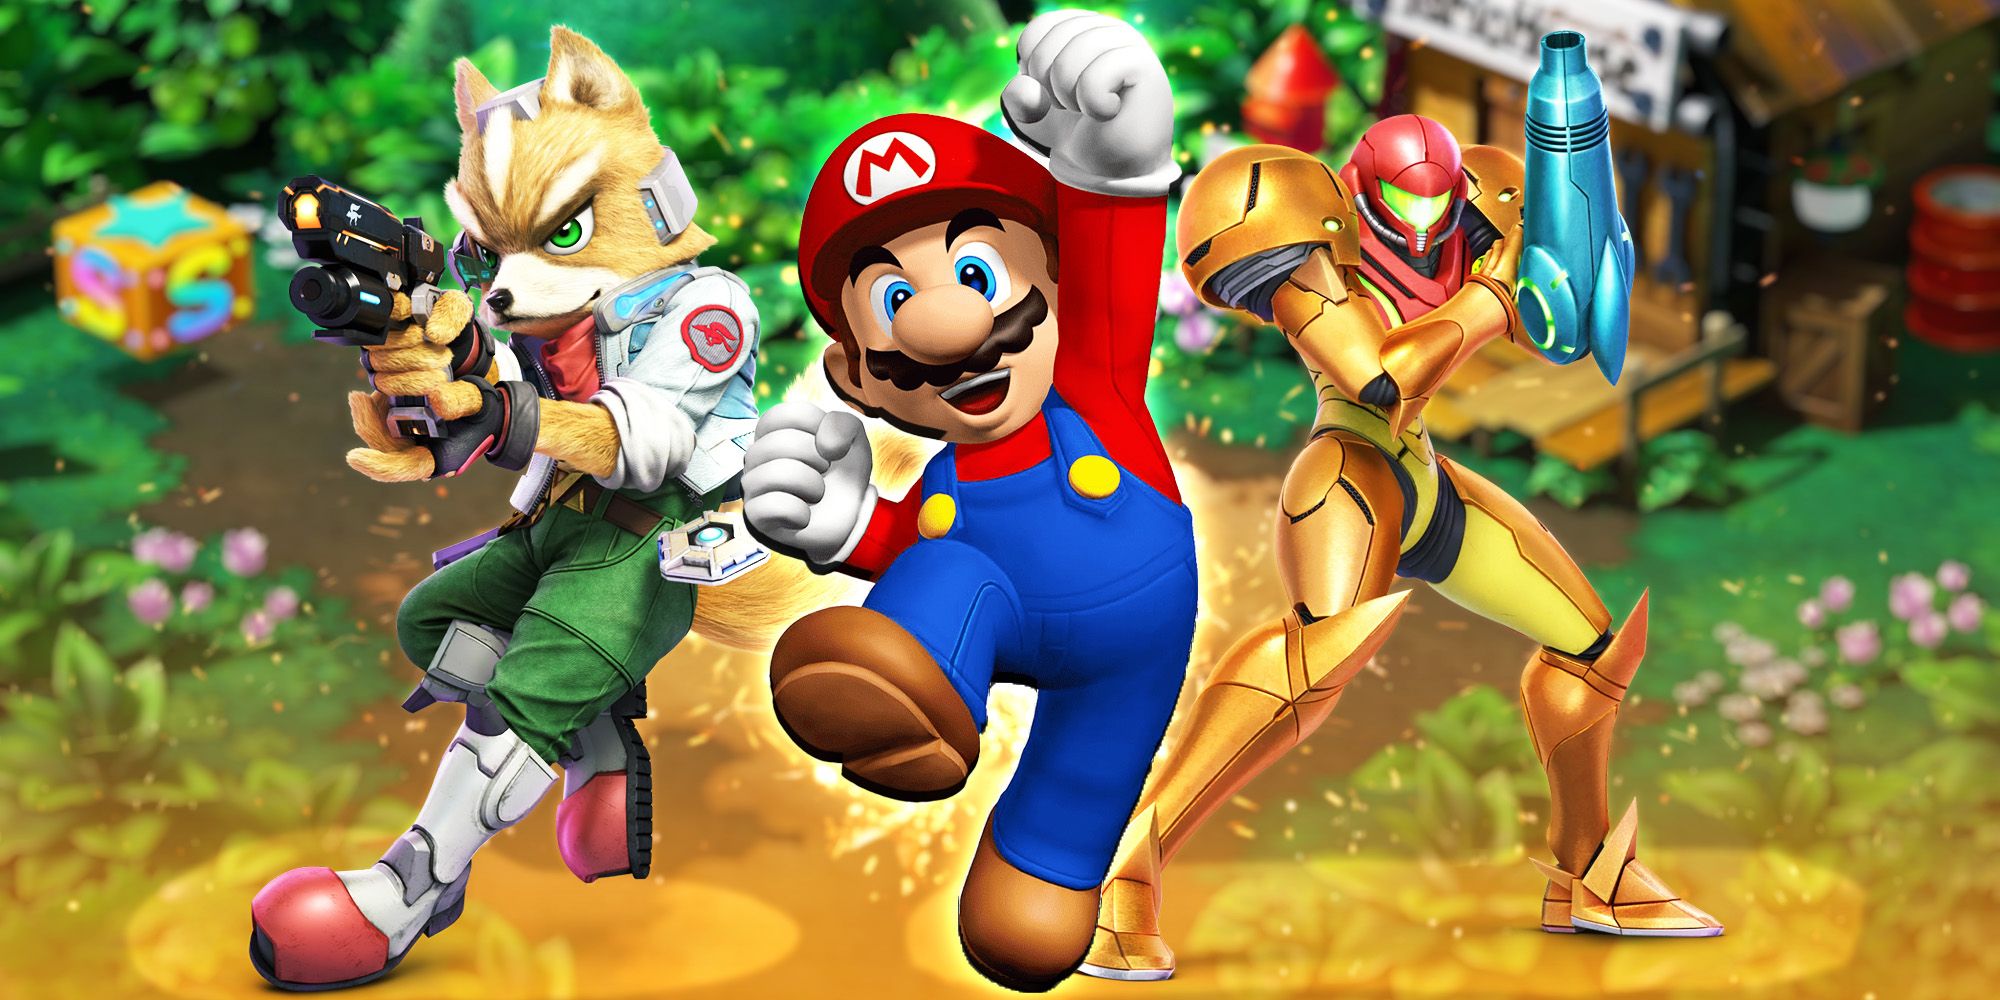 Mario jumps while Fox and Samus pose in screenshots of their Smash Bros. renders. In the background, a screenshot of Mario's house as it appears in Super Mario RPG.